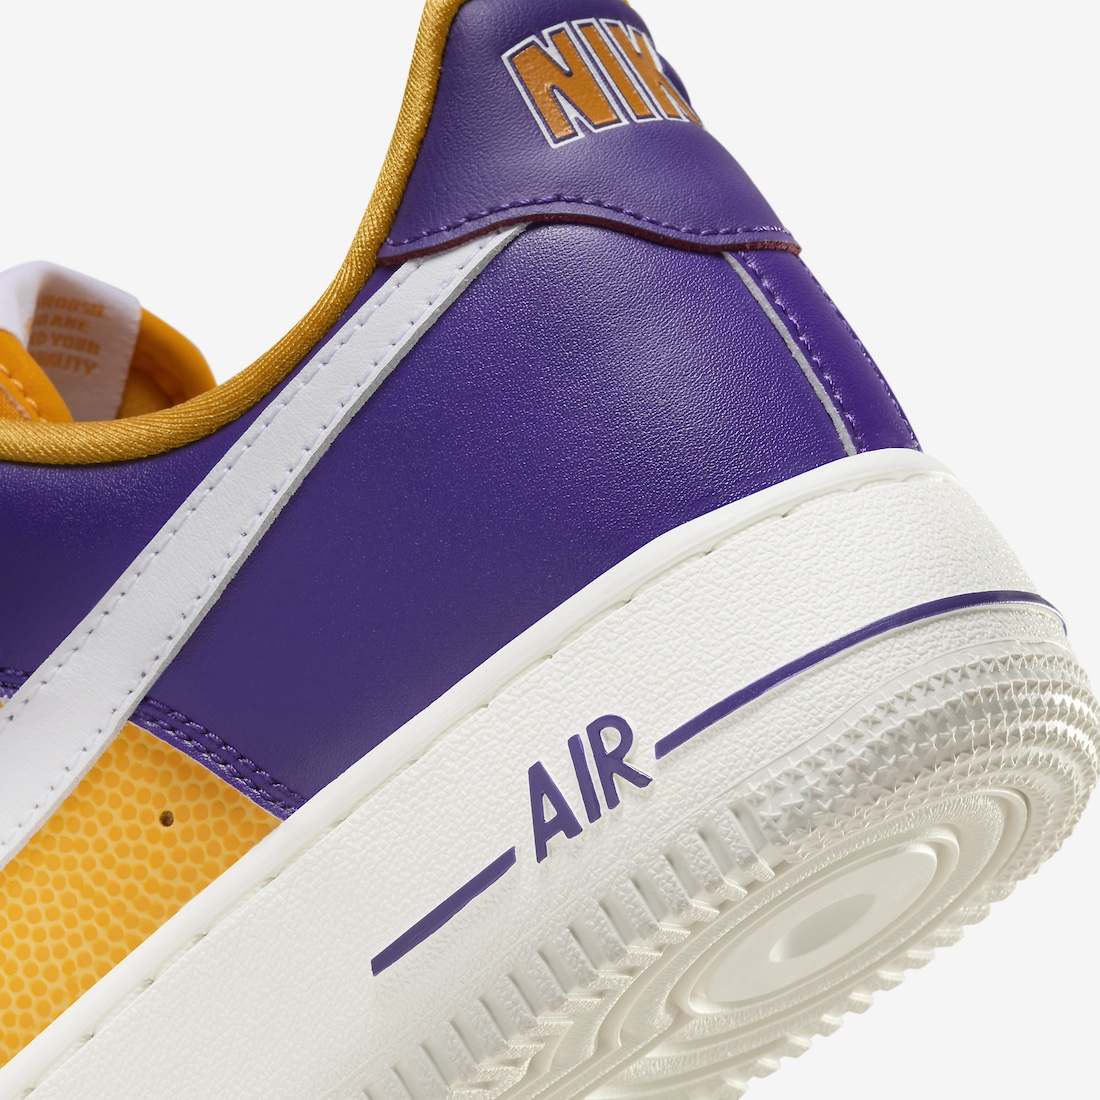 Nike Air Force 1 Low Be True To Her School Purple Gold FJ1408 500 7